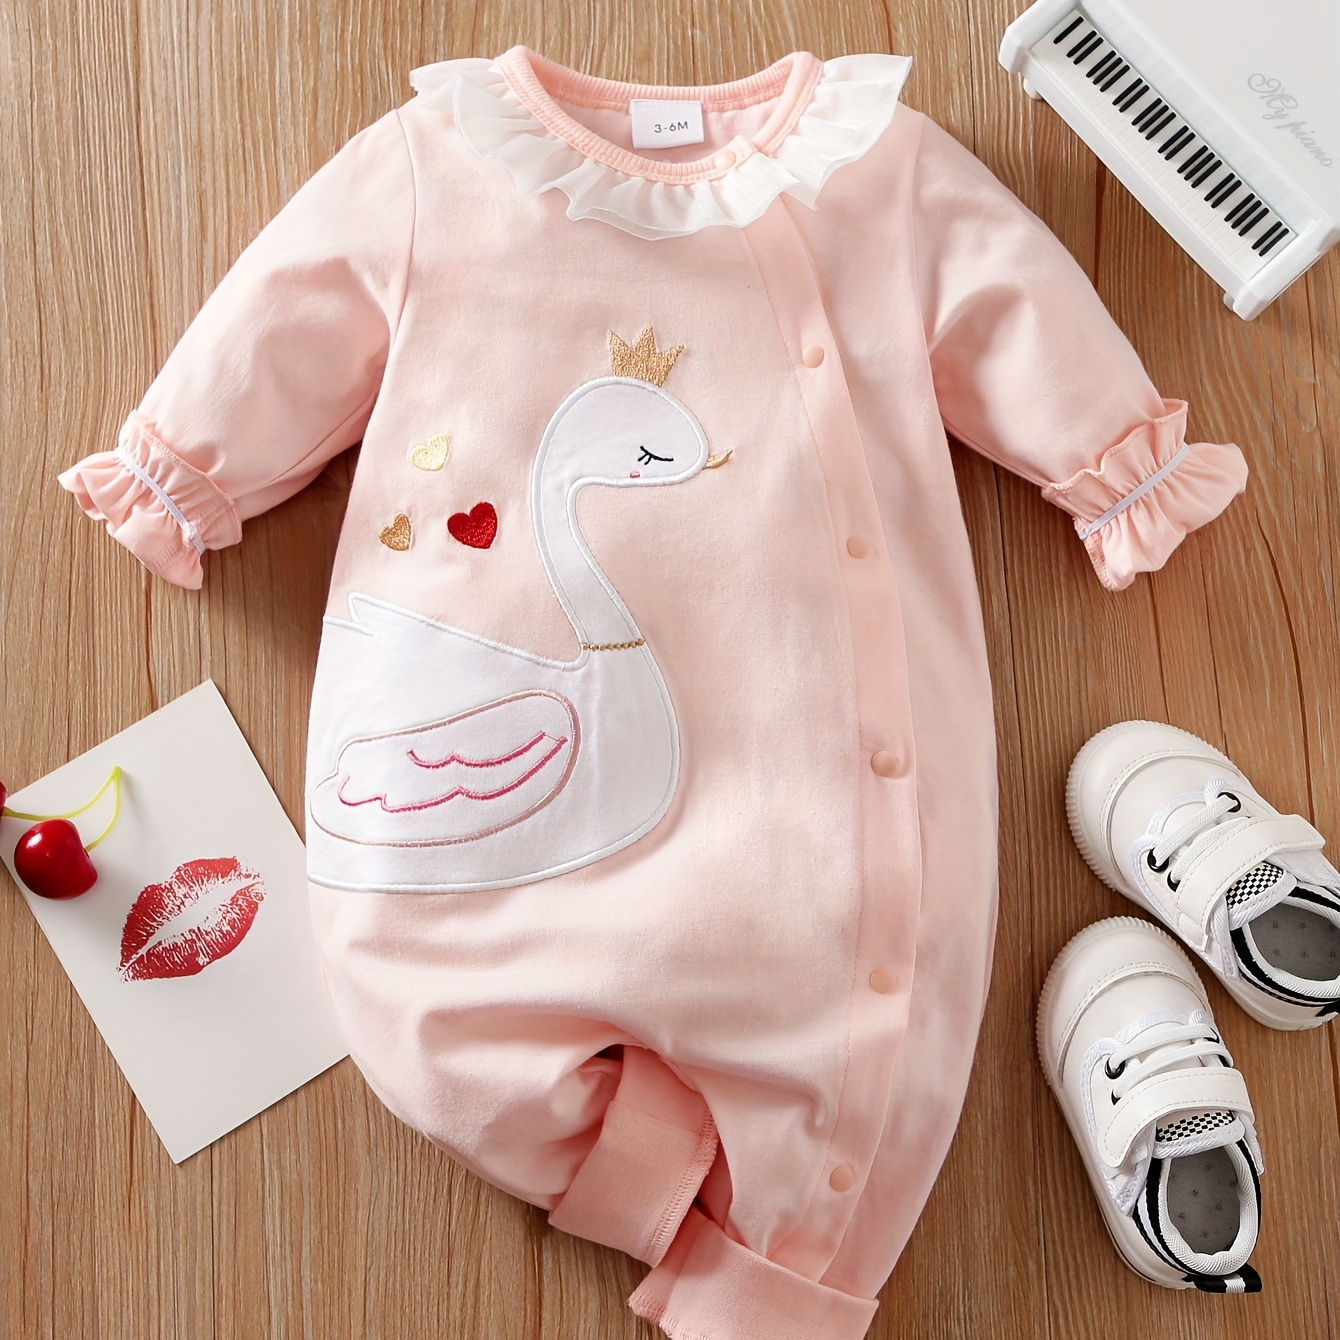 

Baby Girls Cotton Jumpsuits, Long Sleeves Rompers With Swan Print Clothing